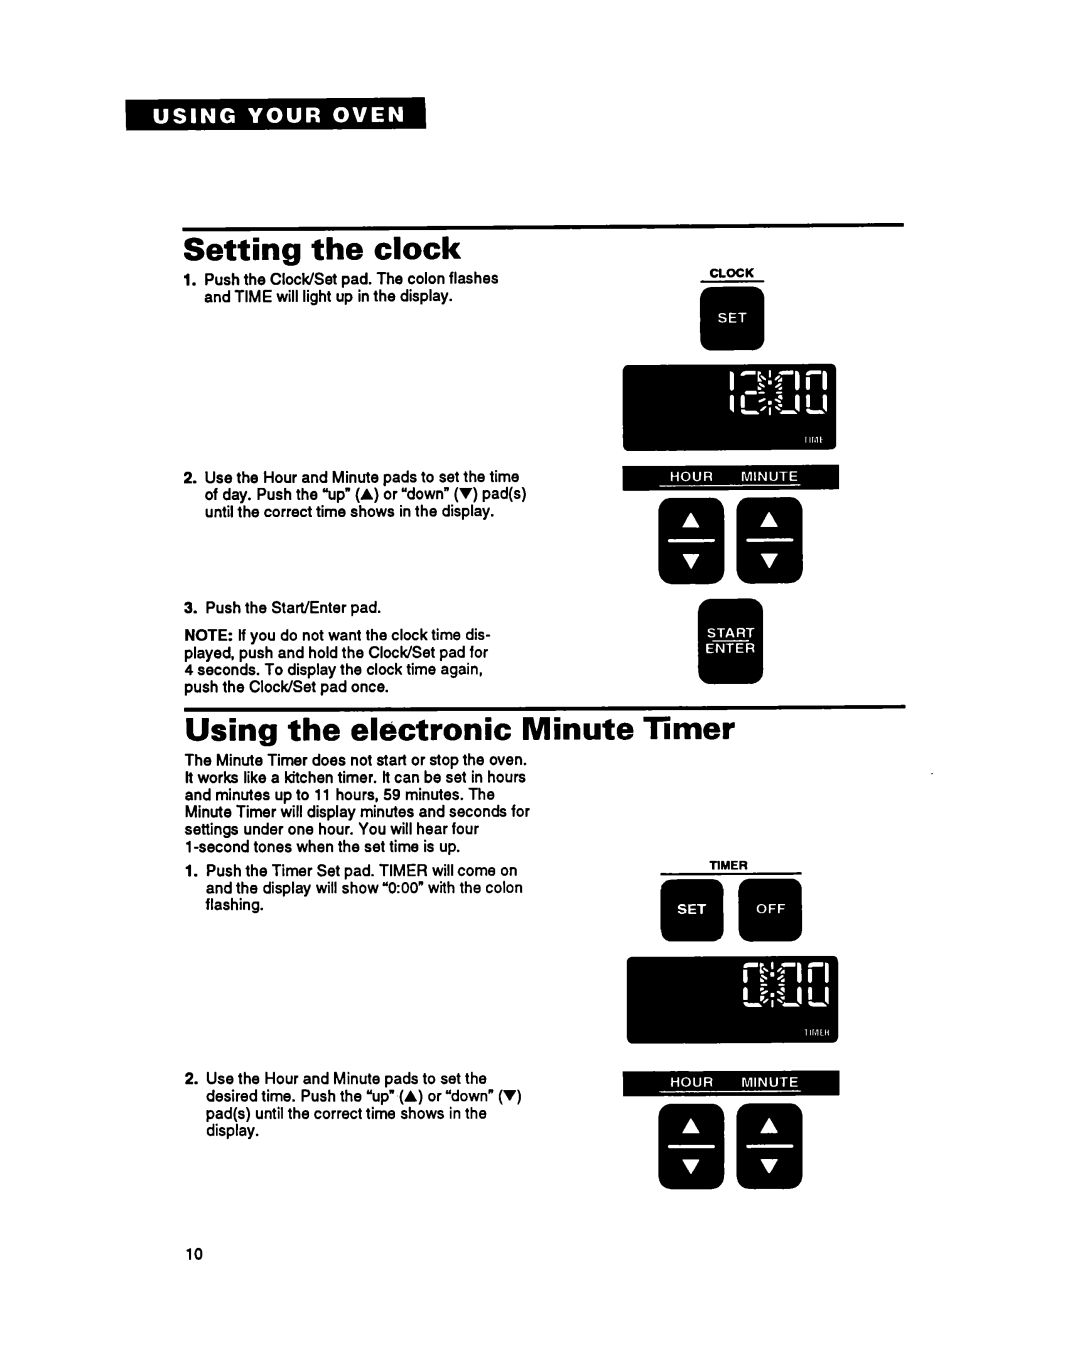 Whirlpool RB770PXY, RB270PXY, RB760PXY, RB17OPXY, RB260PXY, RBIGOPXY Setting the clock, Using the electronic Minute Timer 